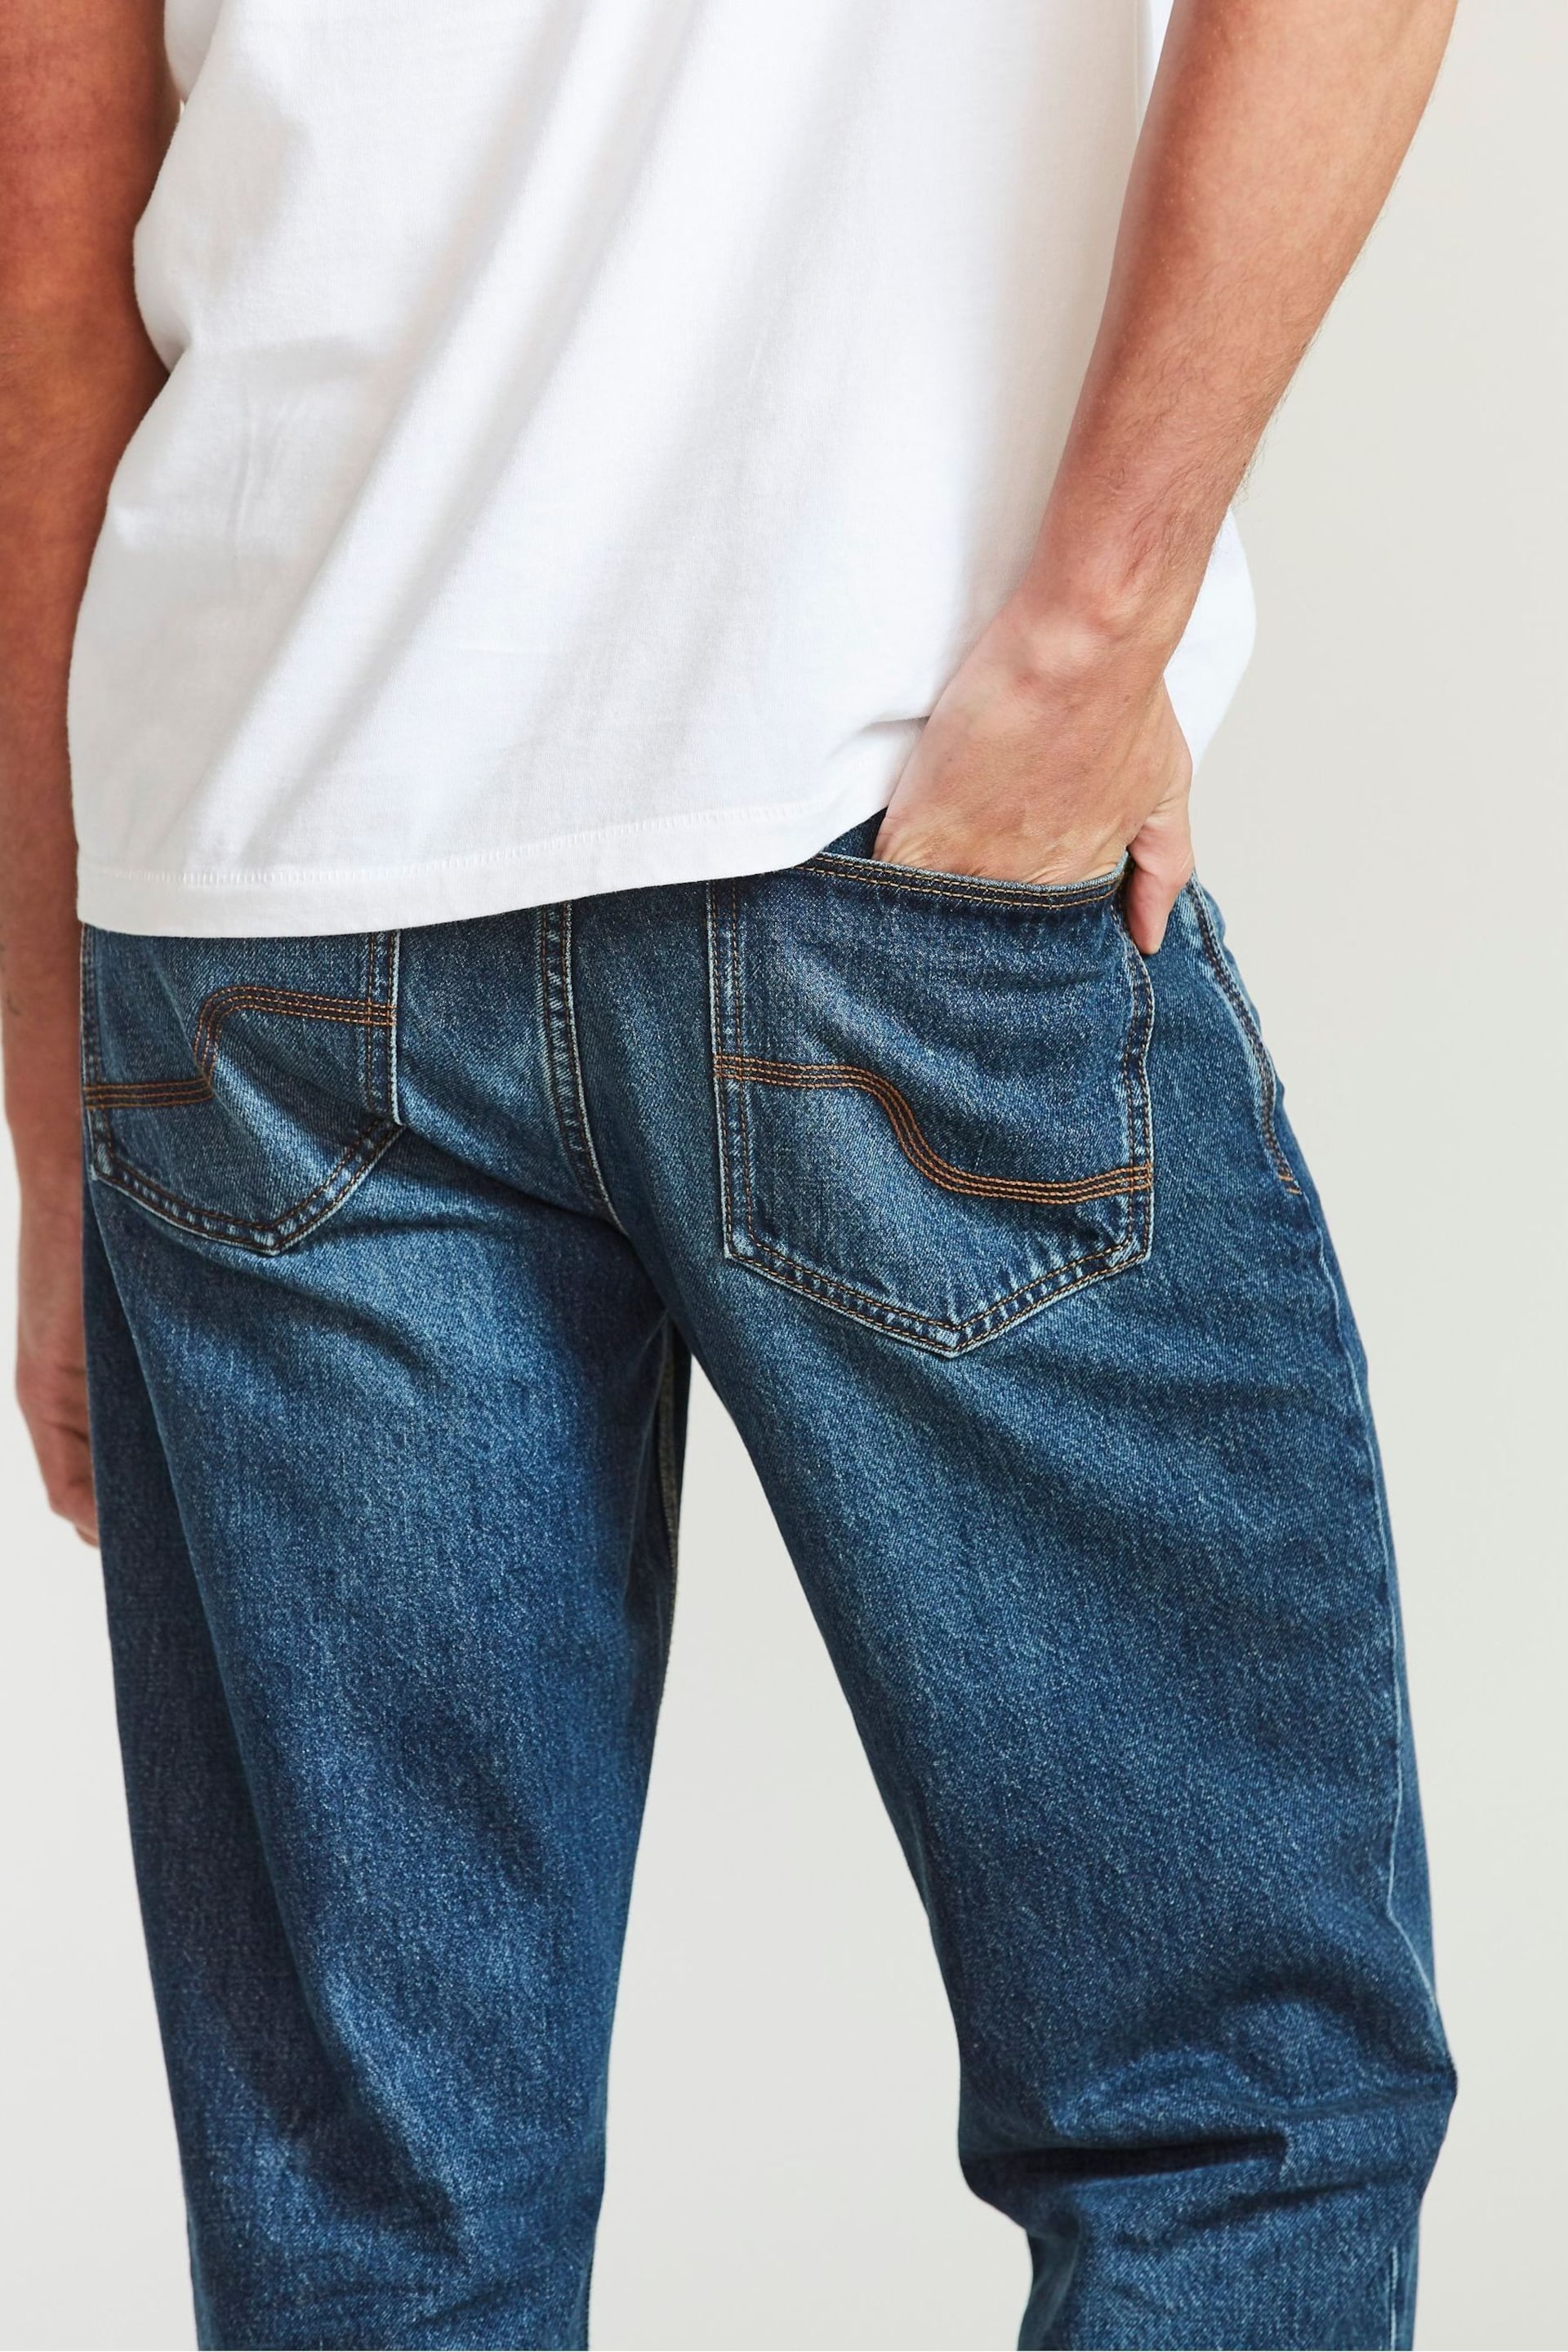 FatFace Mid Wash Denim Bootcut Jeans - Image 4 of 5